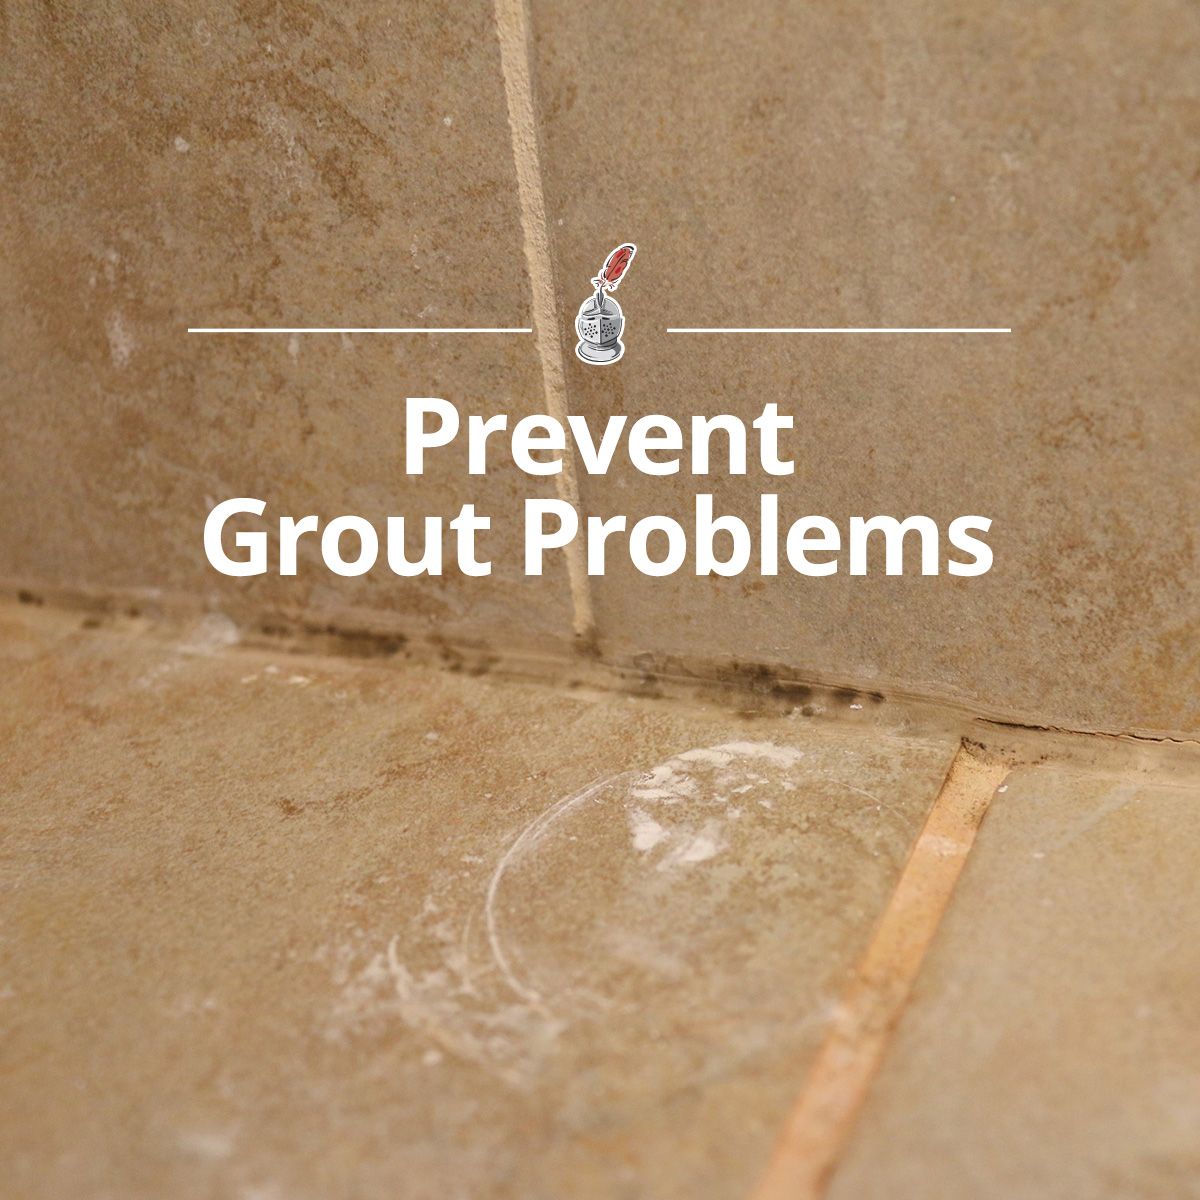 Prevent Grout Problems